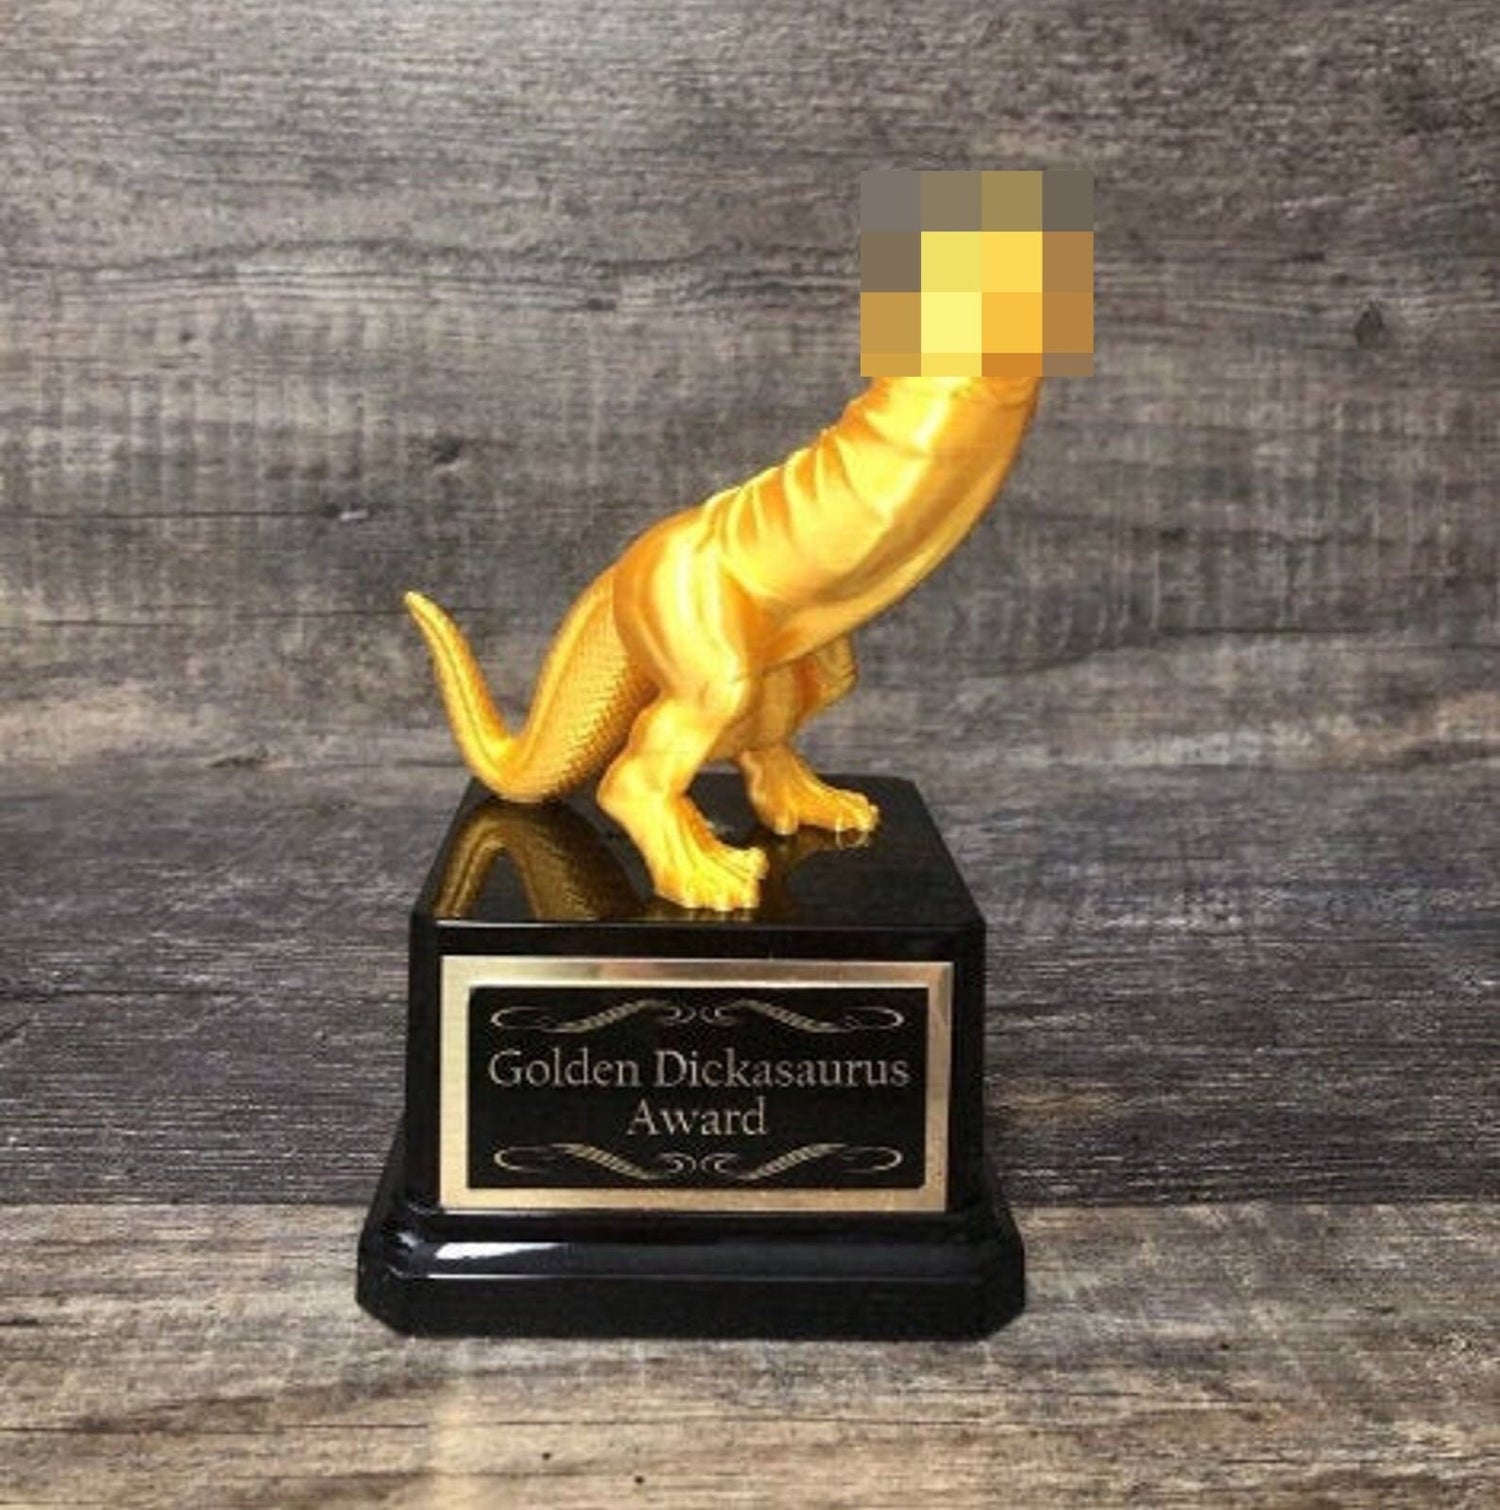 Funny Trophy For Loser Golden Dickasaurus Funny Mature Trophy Award Last Place Adult Humor Gag Gift Penis Trophy Birthday Gift You're A Dick